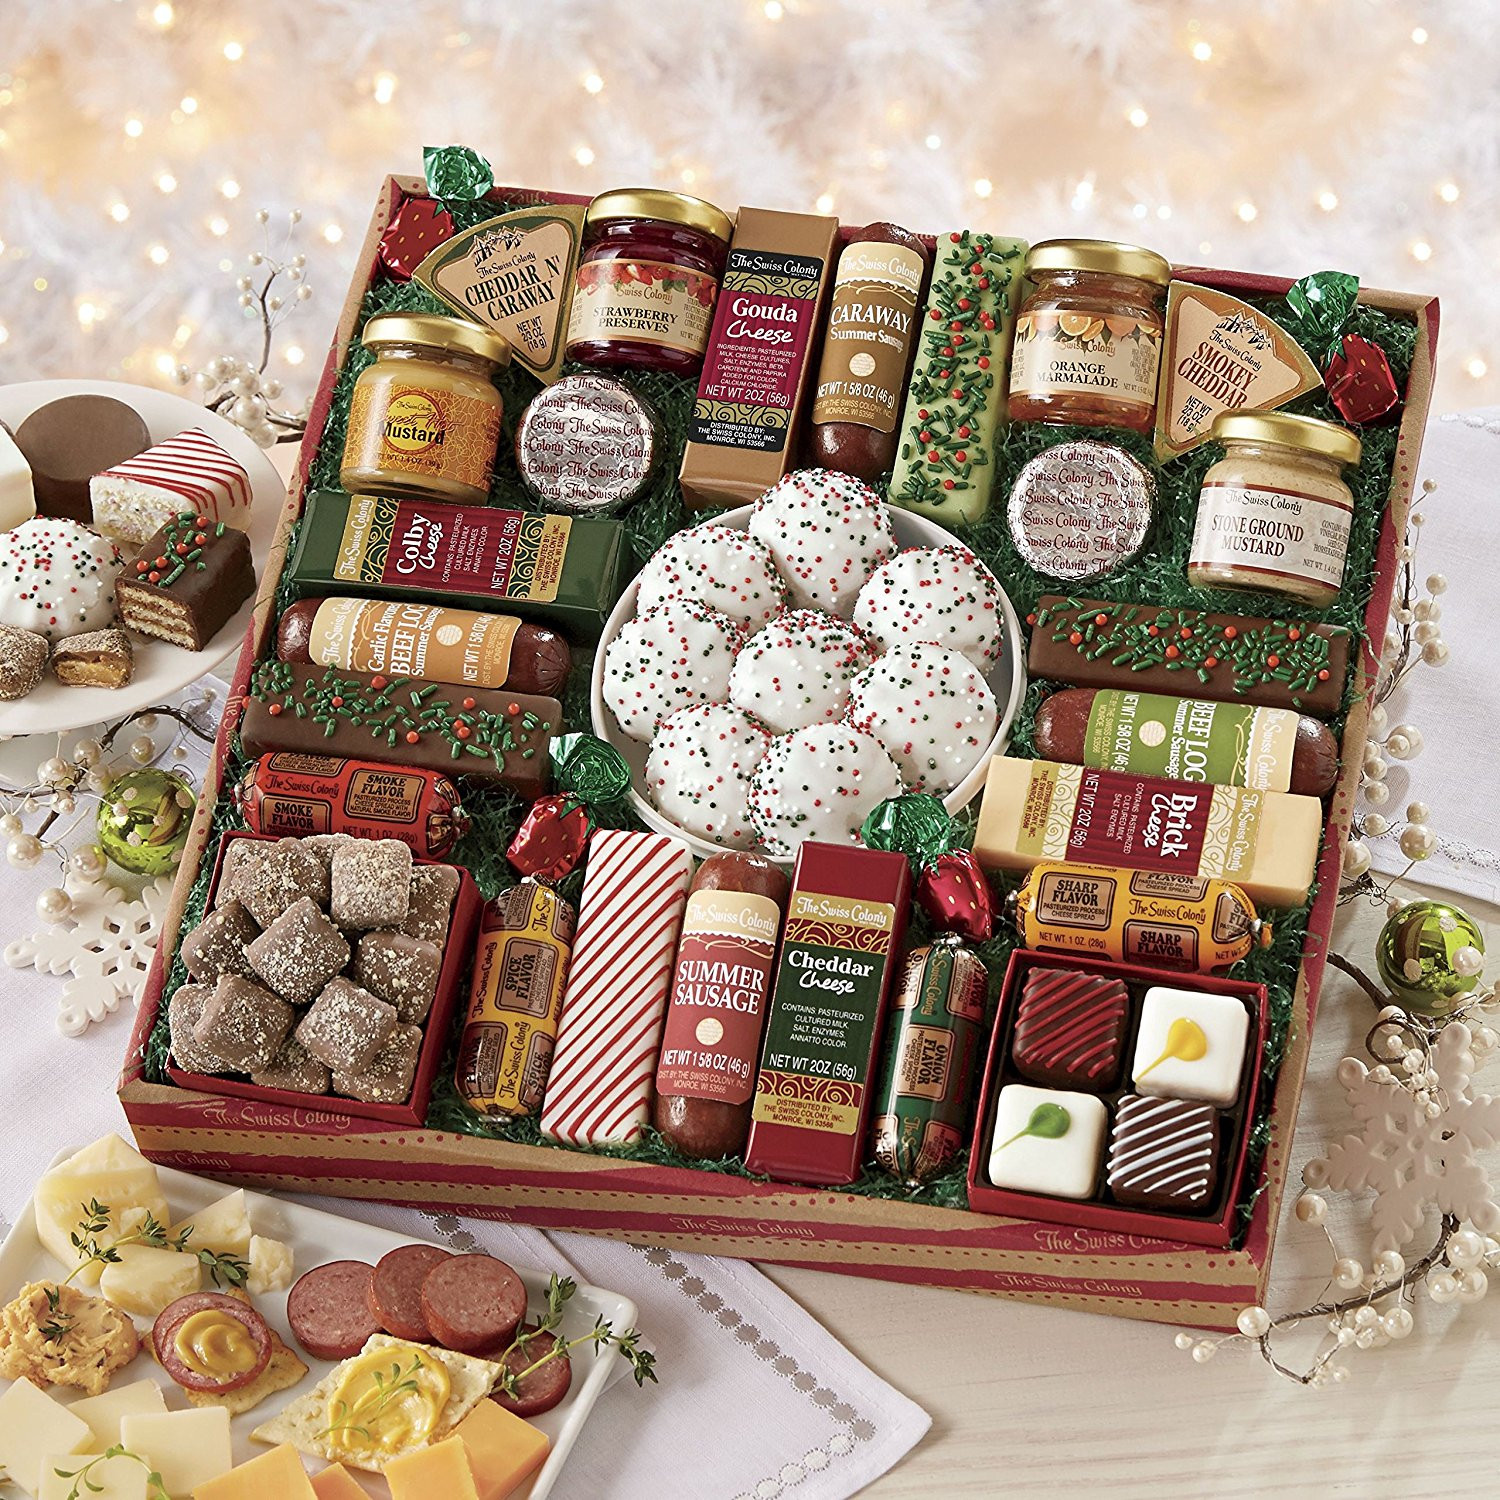 Food Holiday Gift Ideas
 Gourmet Food Gift Baskets Best Cheeses Sausages Meat